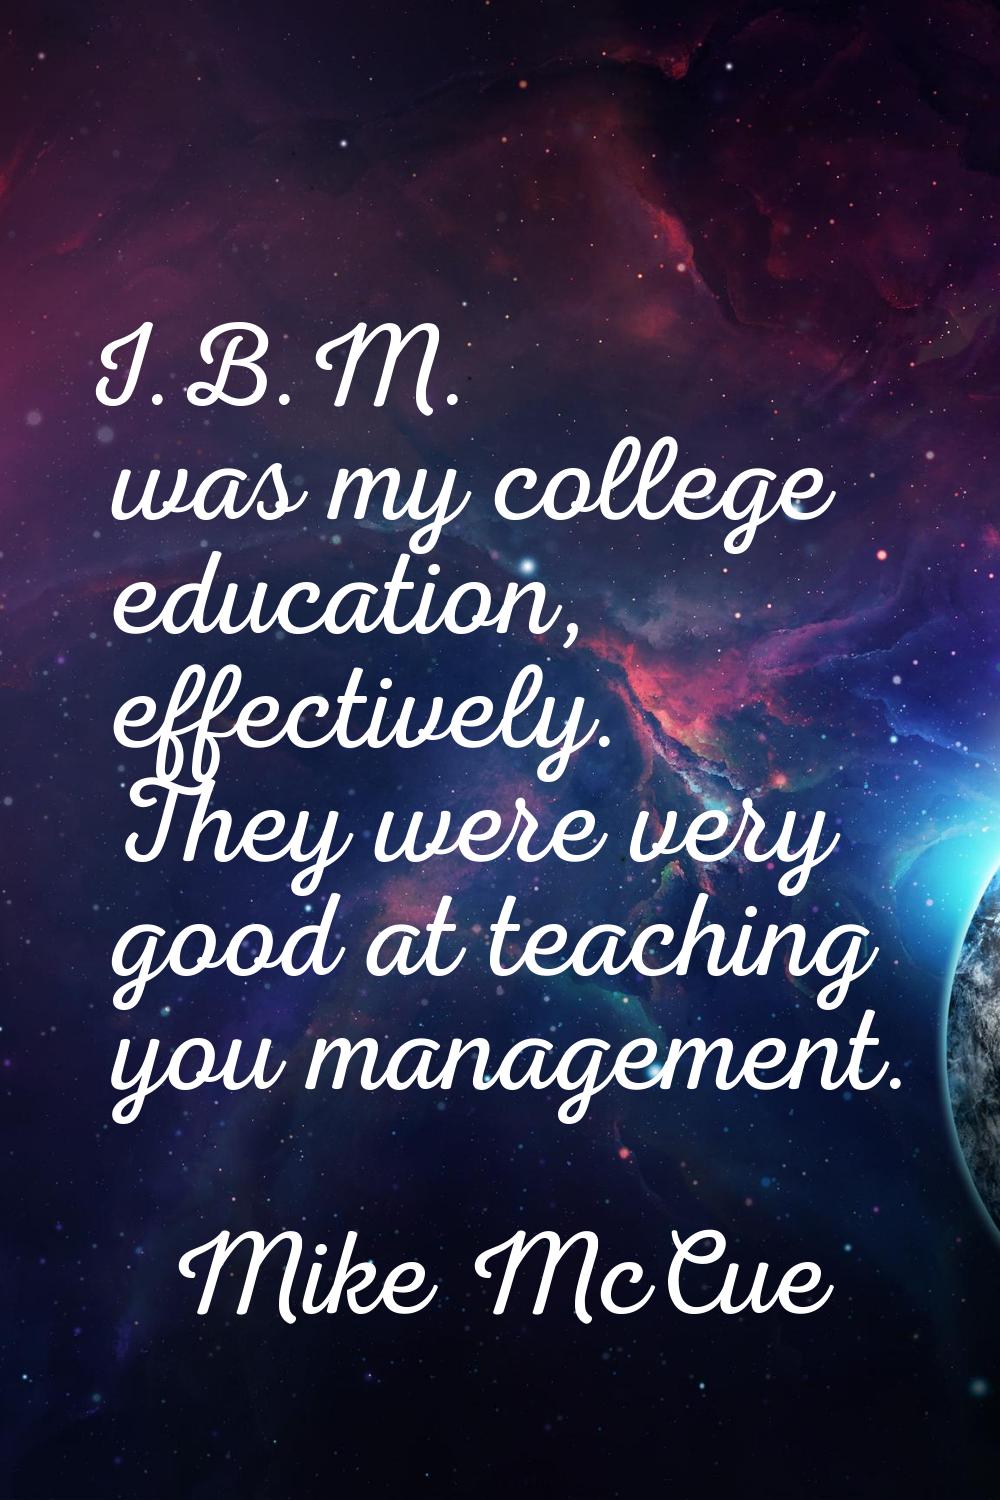 I.B.M. was my college education, effectively. They were very good at teaching you management.